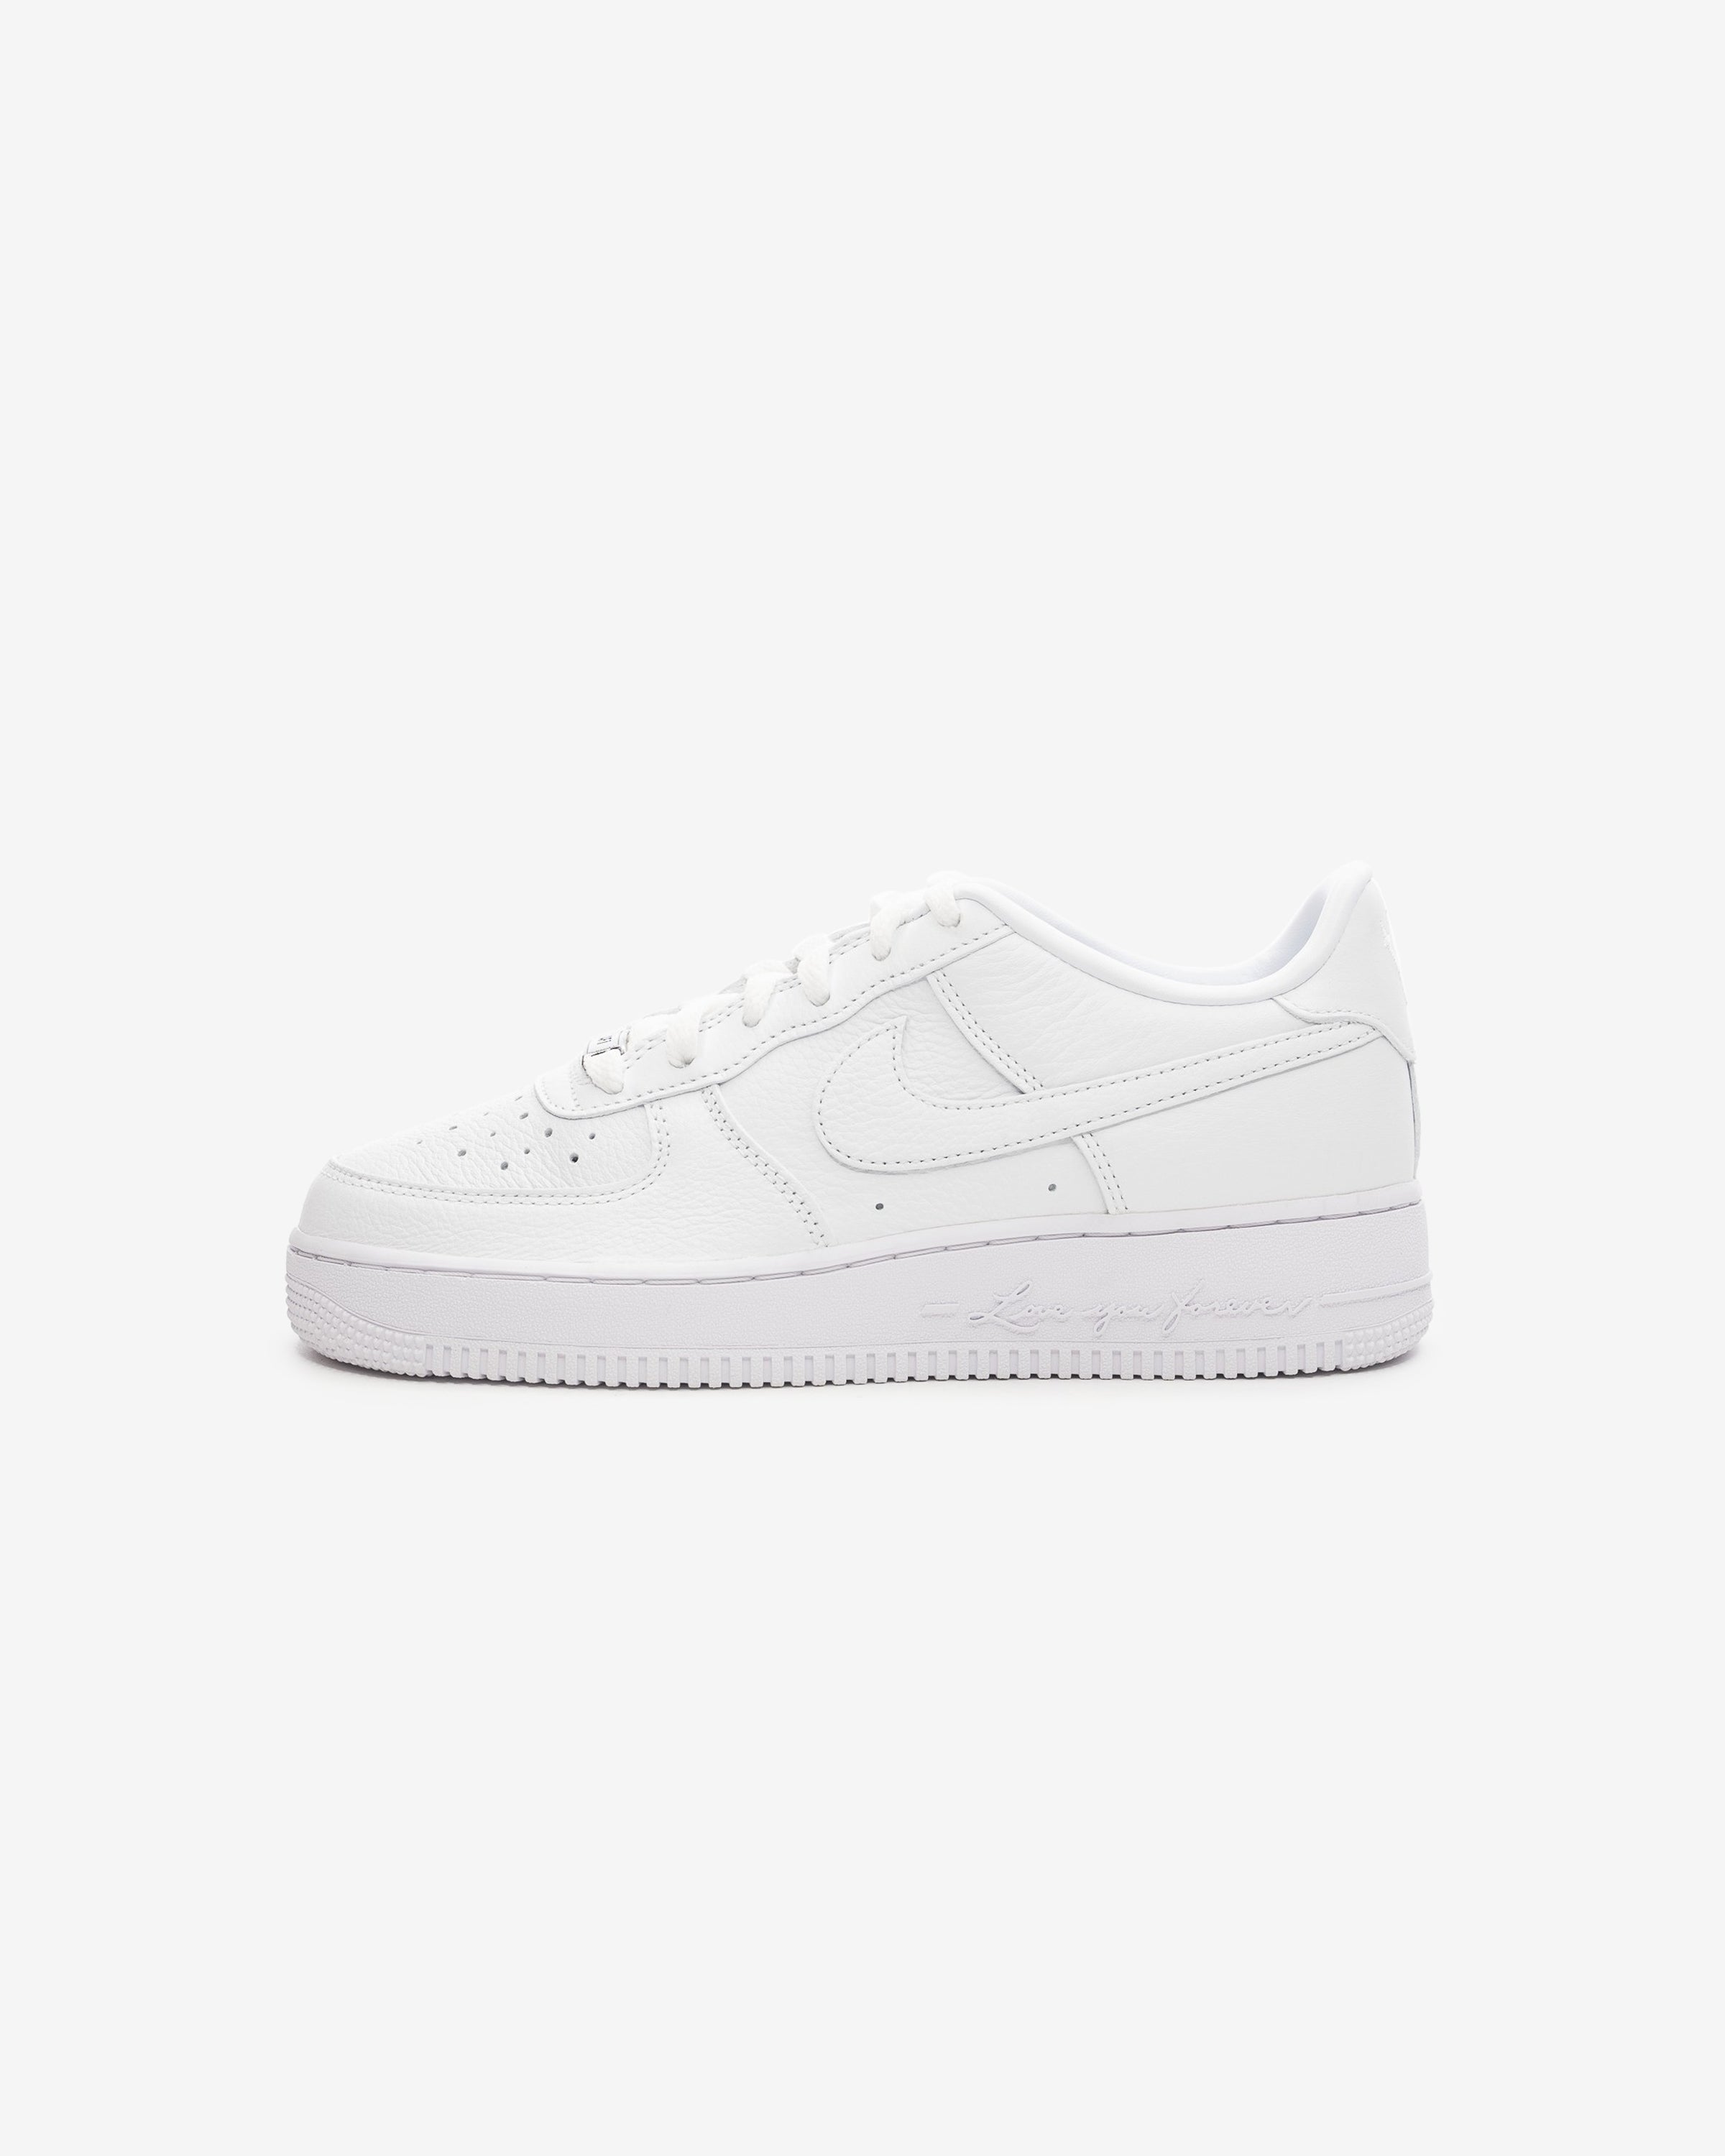 NIKE X NOCTA GS AIR FORCE 1 LOW - WHITE/ COBALTTINT